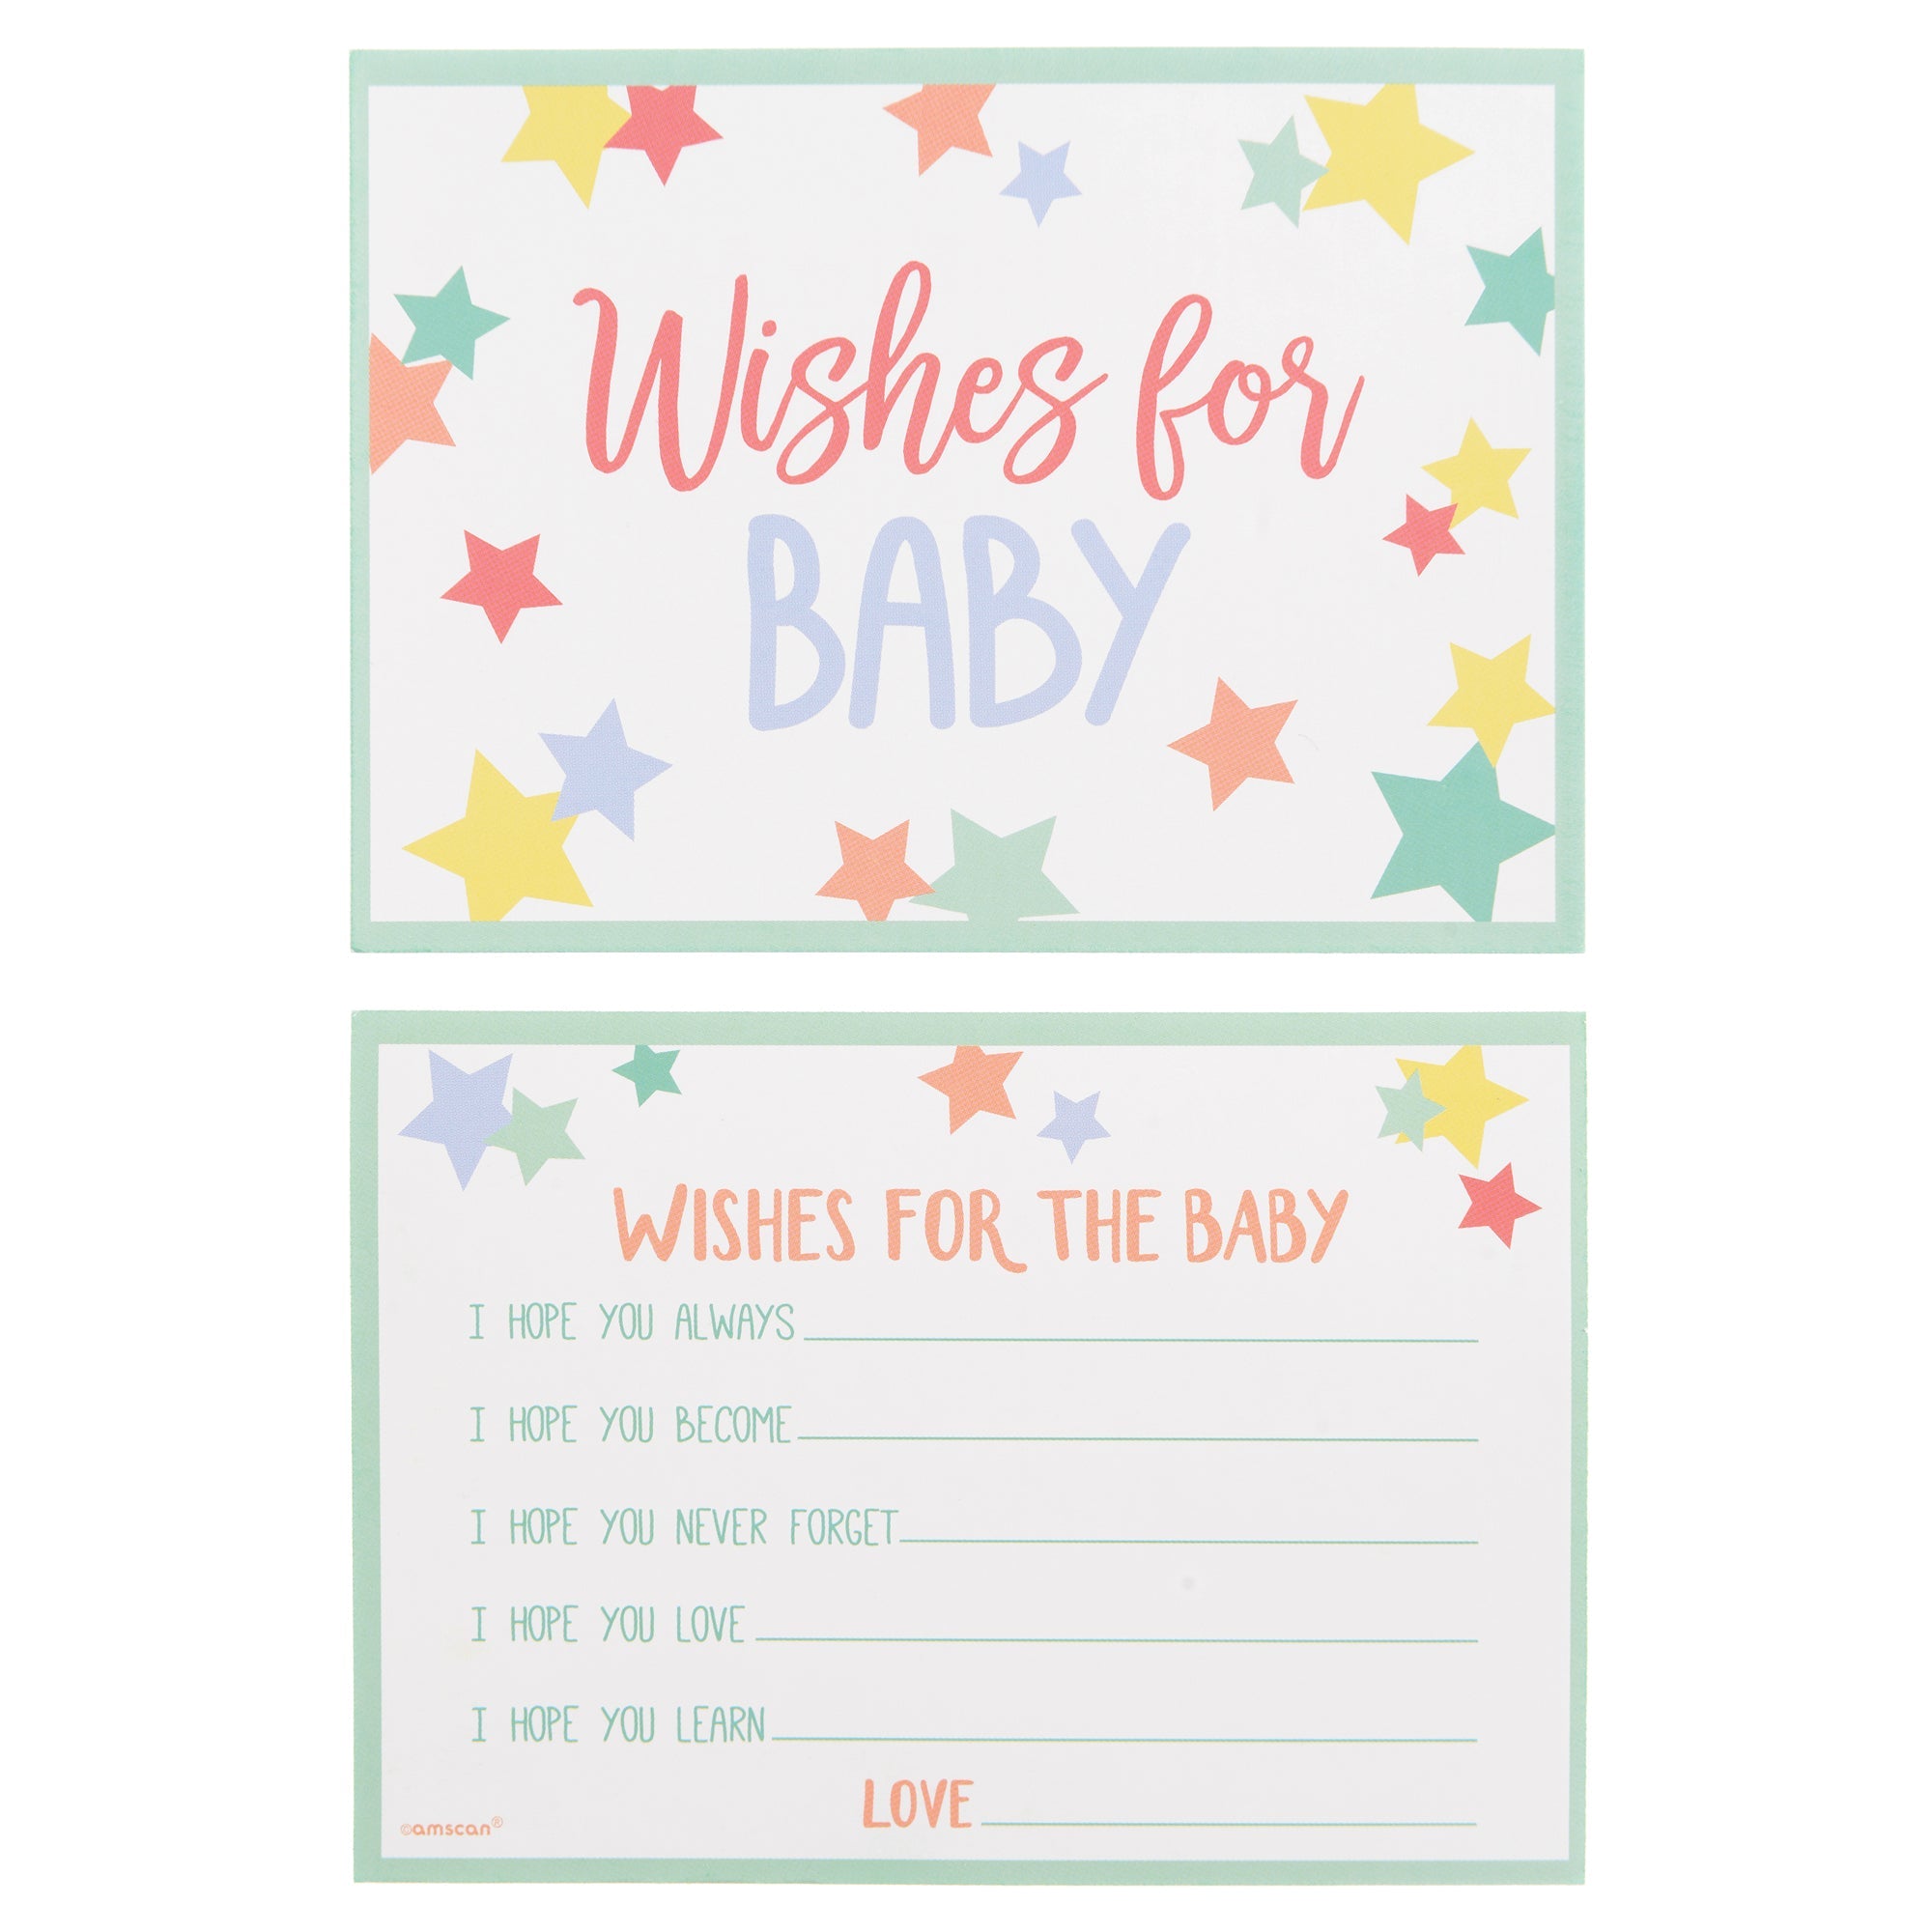 Baby Shower "Wishes for Baby" Cards 4 7/8"w x 3 7/16"h package 24